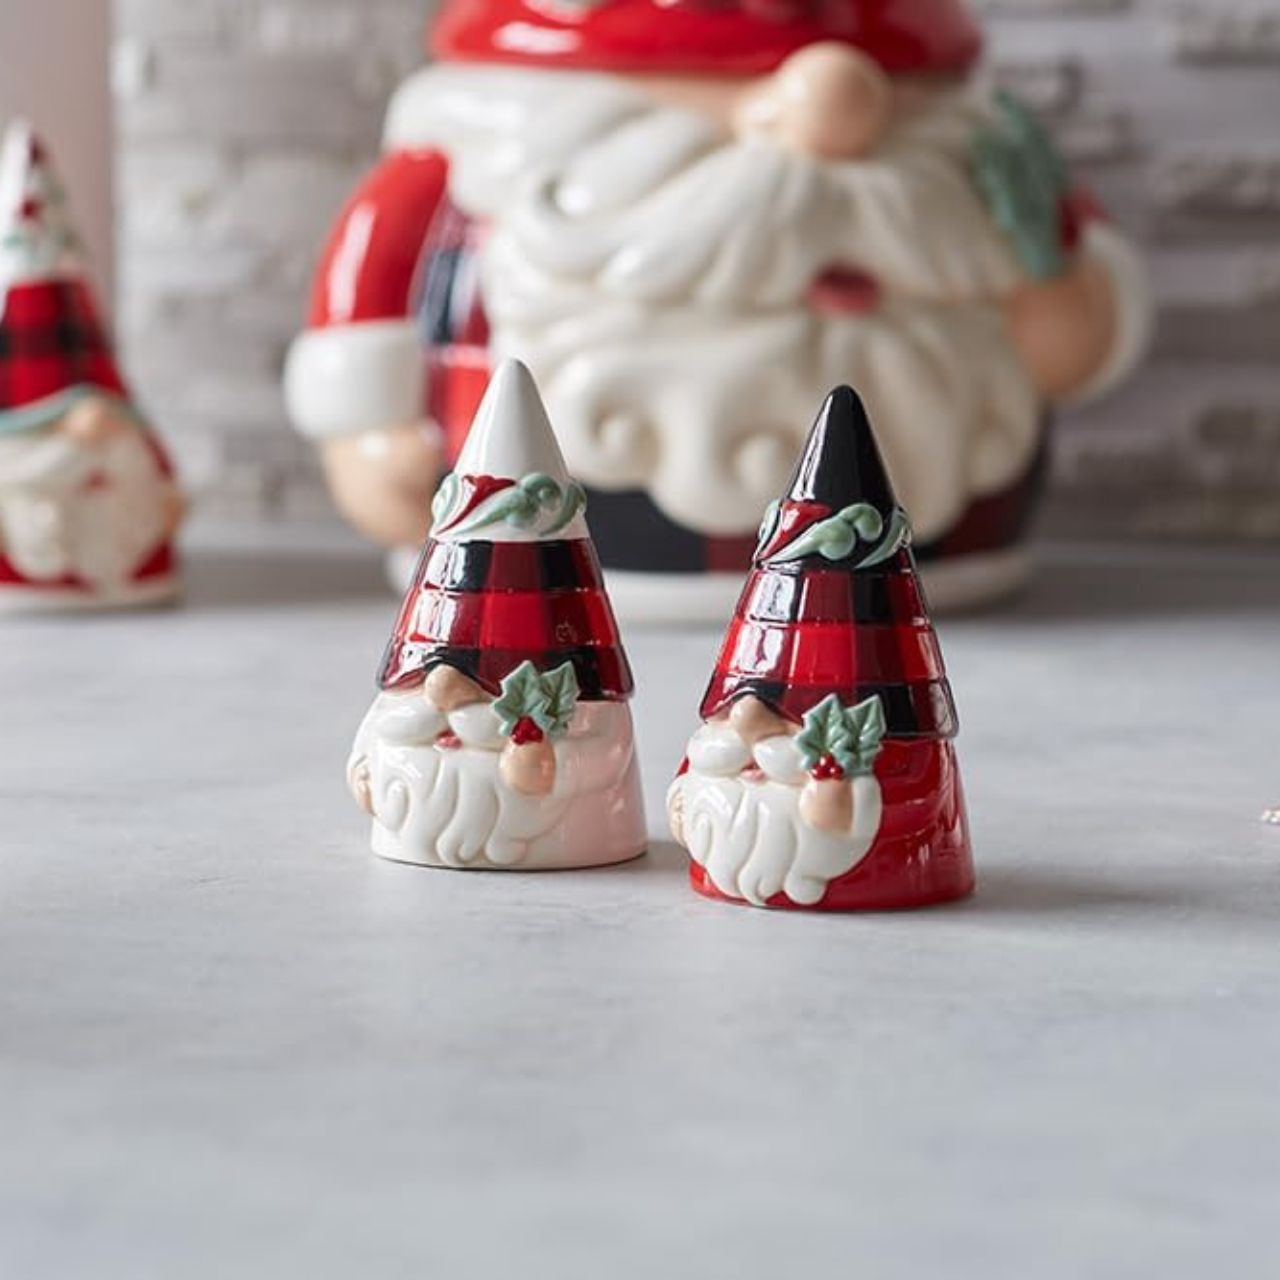 Christmas Highland Glen Salt & Pepper Shakers by Jim Shore  Designed by award winning artist Jim Shore as part of the Heartwood Creek Highland Glen Collection, hand crafted using high quality cast stone and hand painted, these salt & pepper shakers is perfect for the Christmas season. 